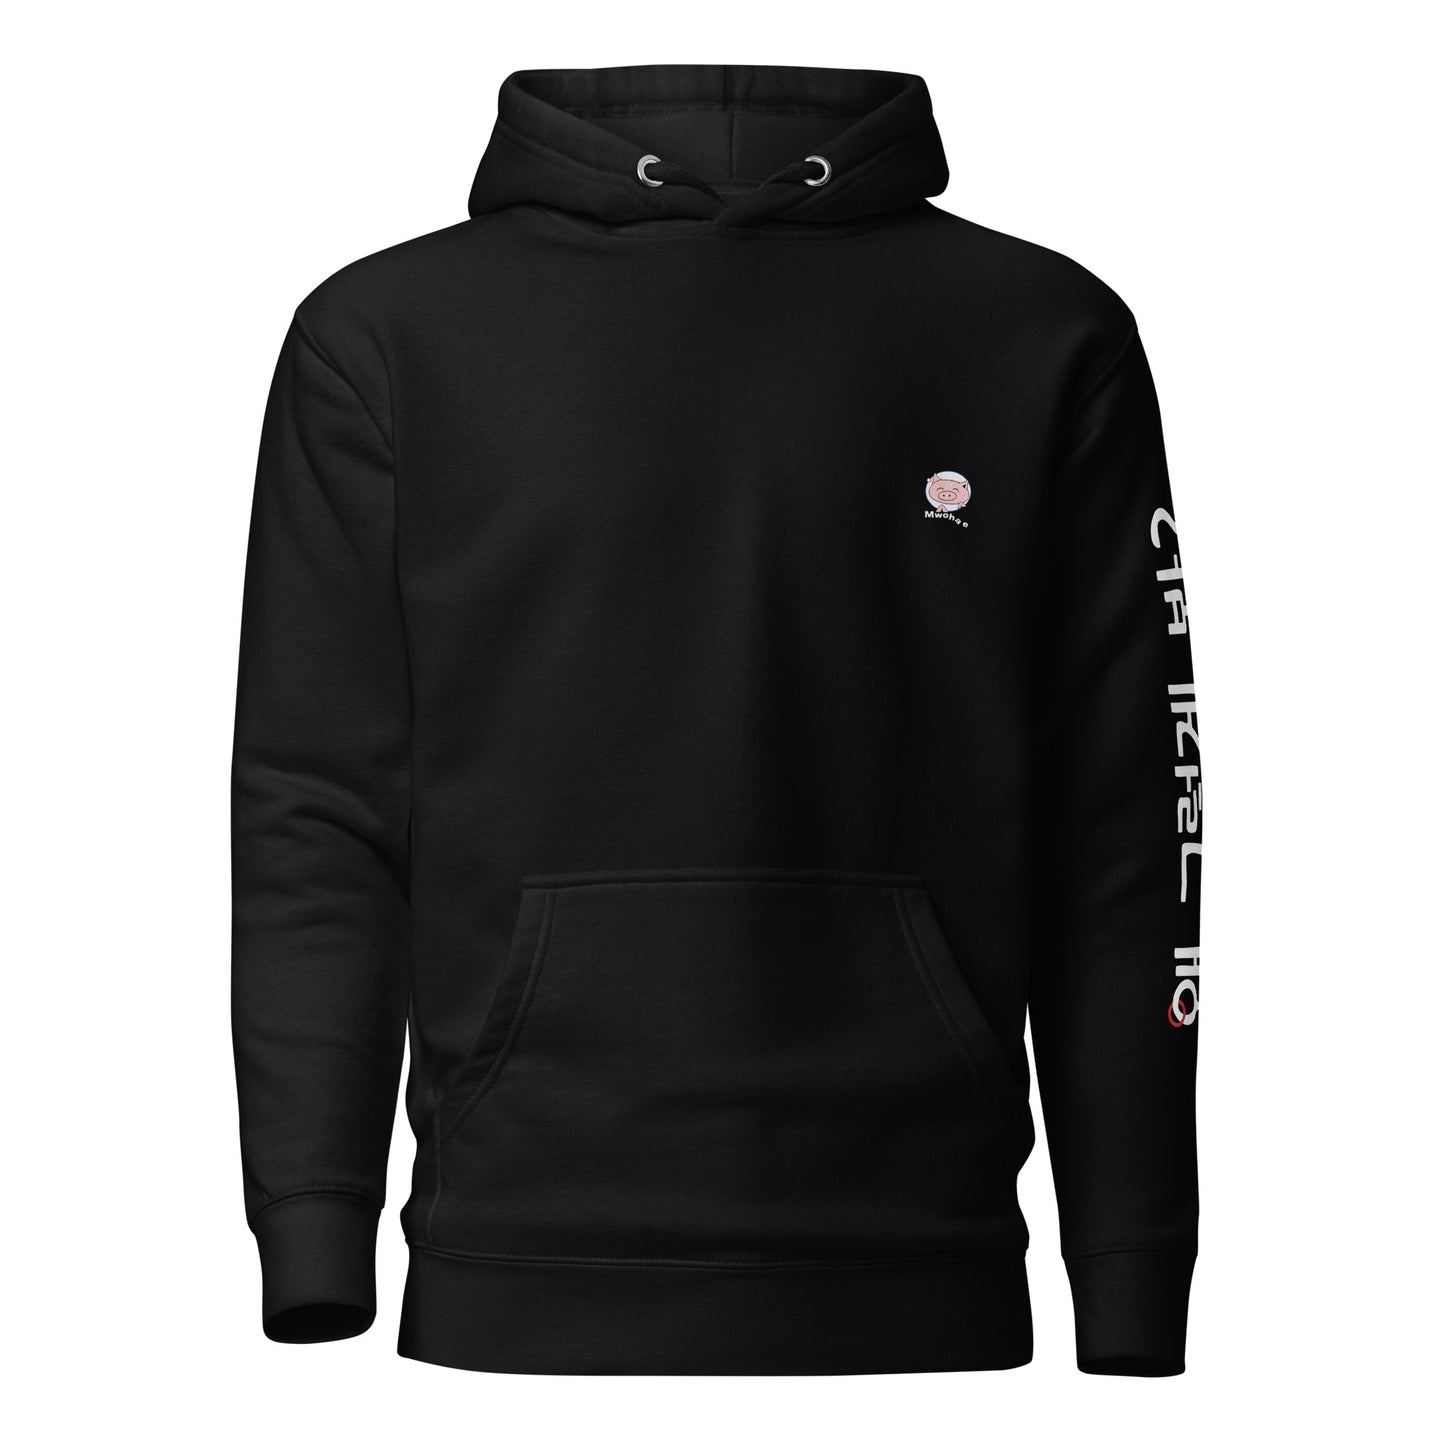 Black hoodie with small Mwohae logo on the left chest